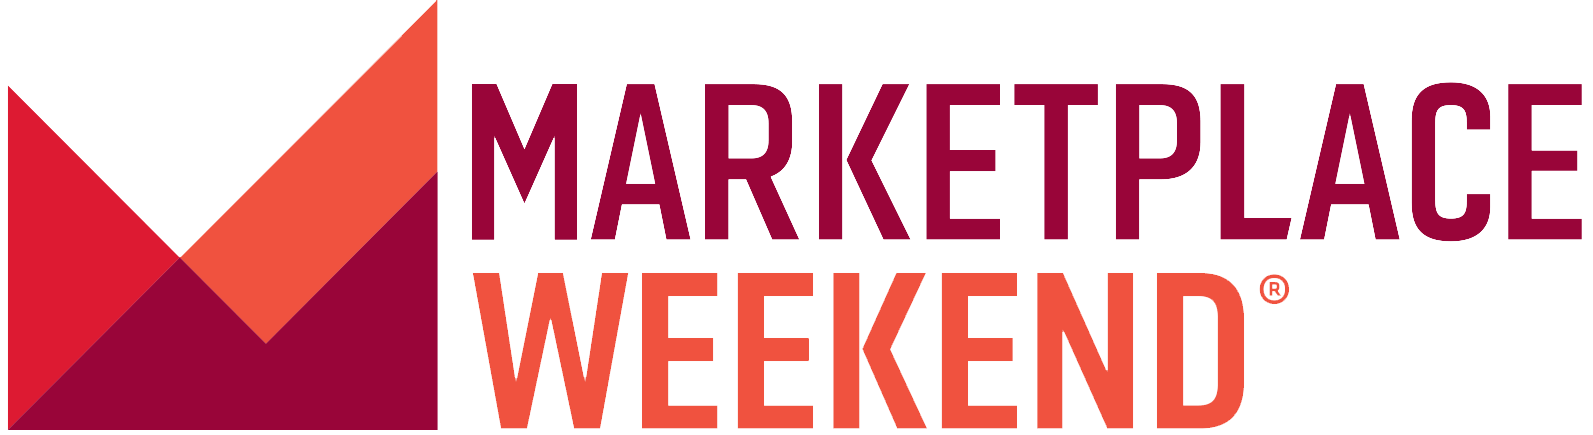 Marketplace Weekend for Friday, November 7, 2014